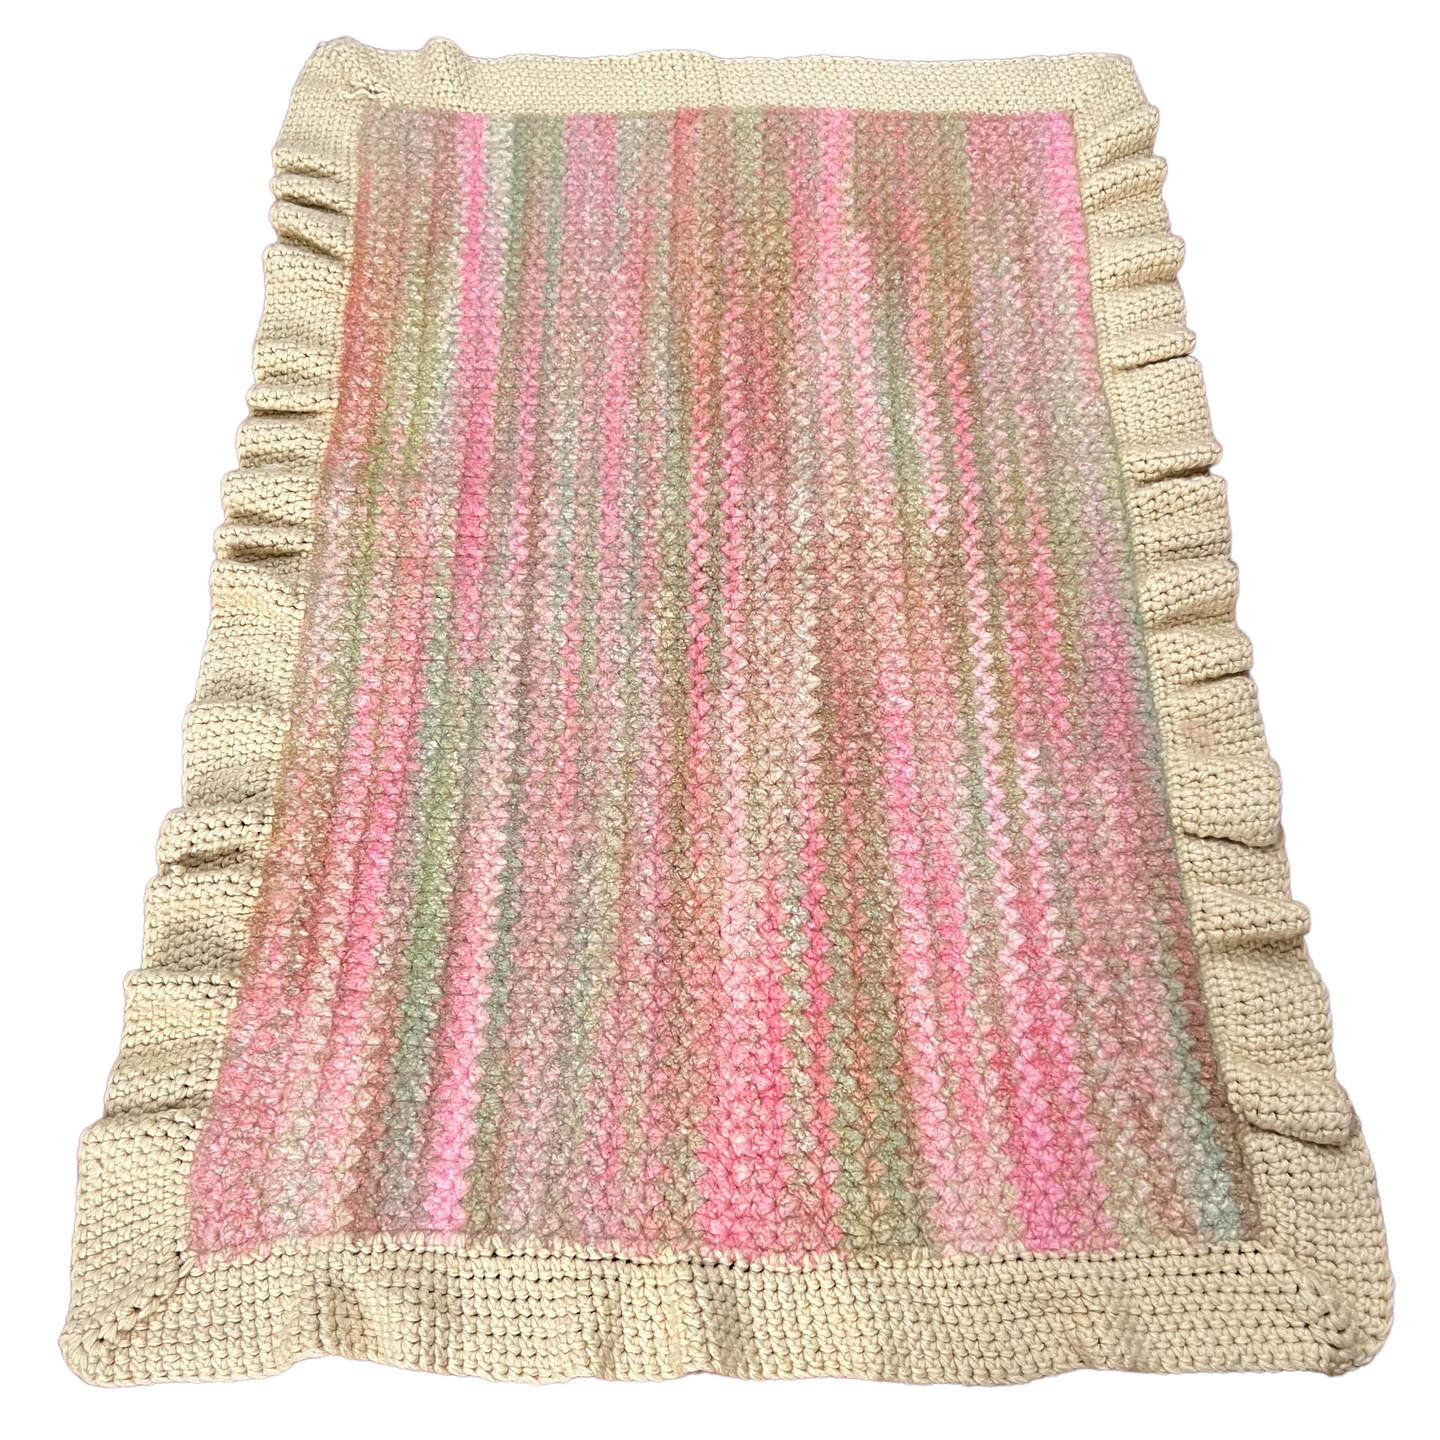 Weighted Wool Knit Throw Blanket 8lbs